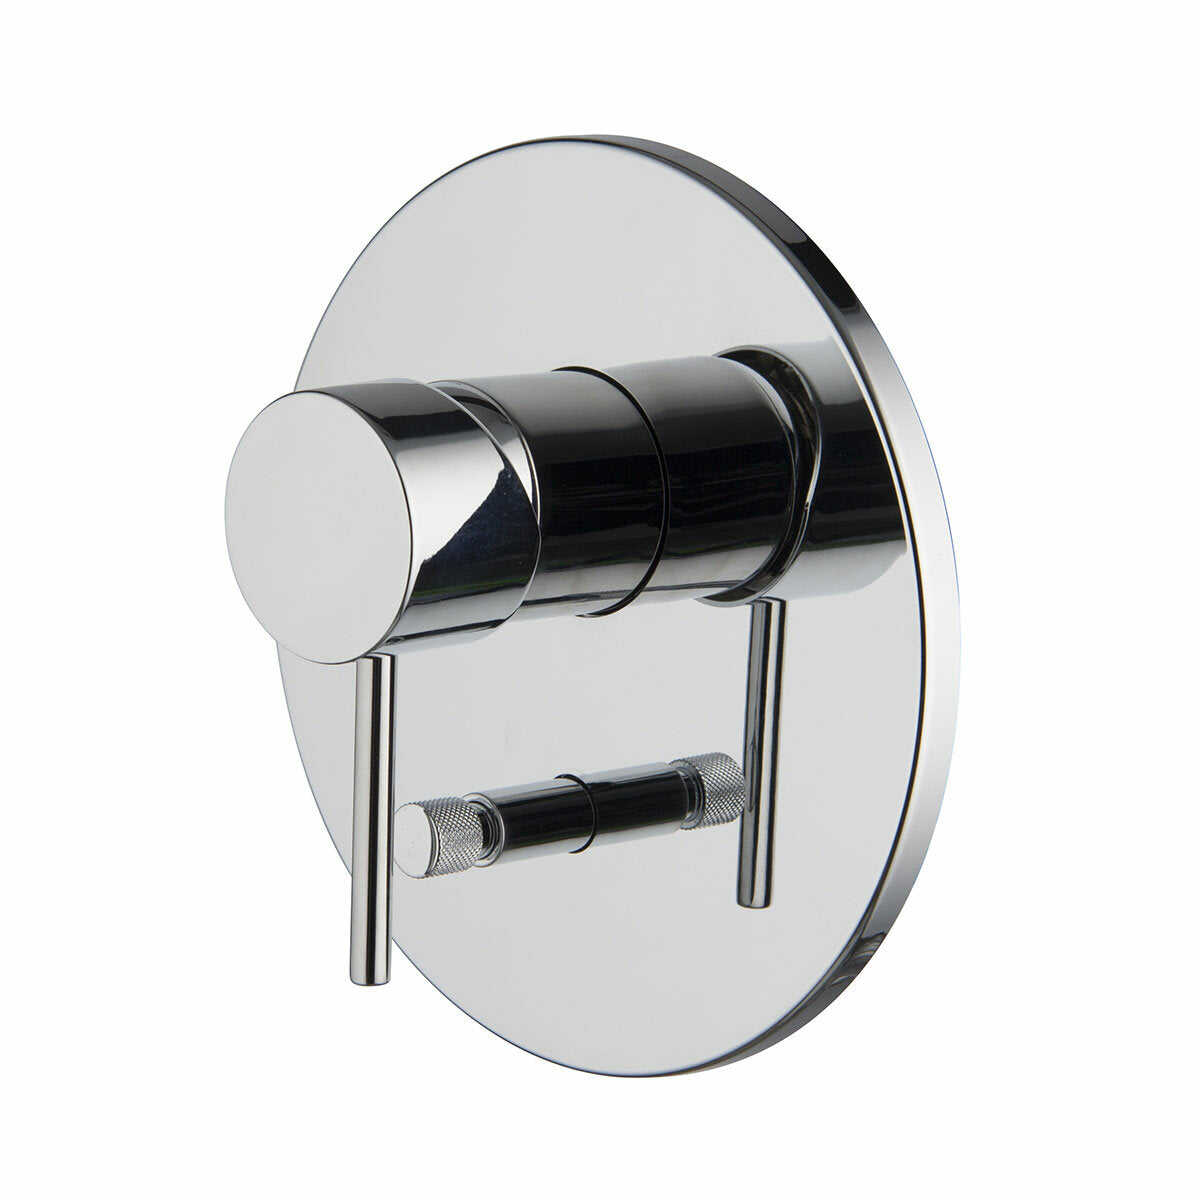 Fima Carlo Frattini Spillo Up built-in shower mixer with two outlet diverter. Outside part only.